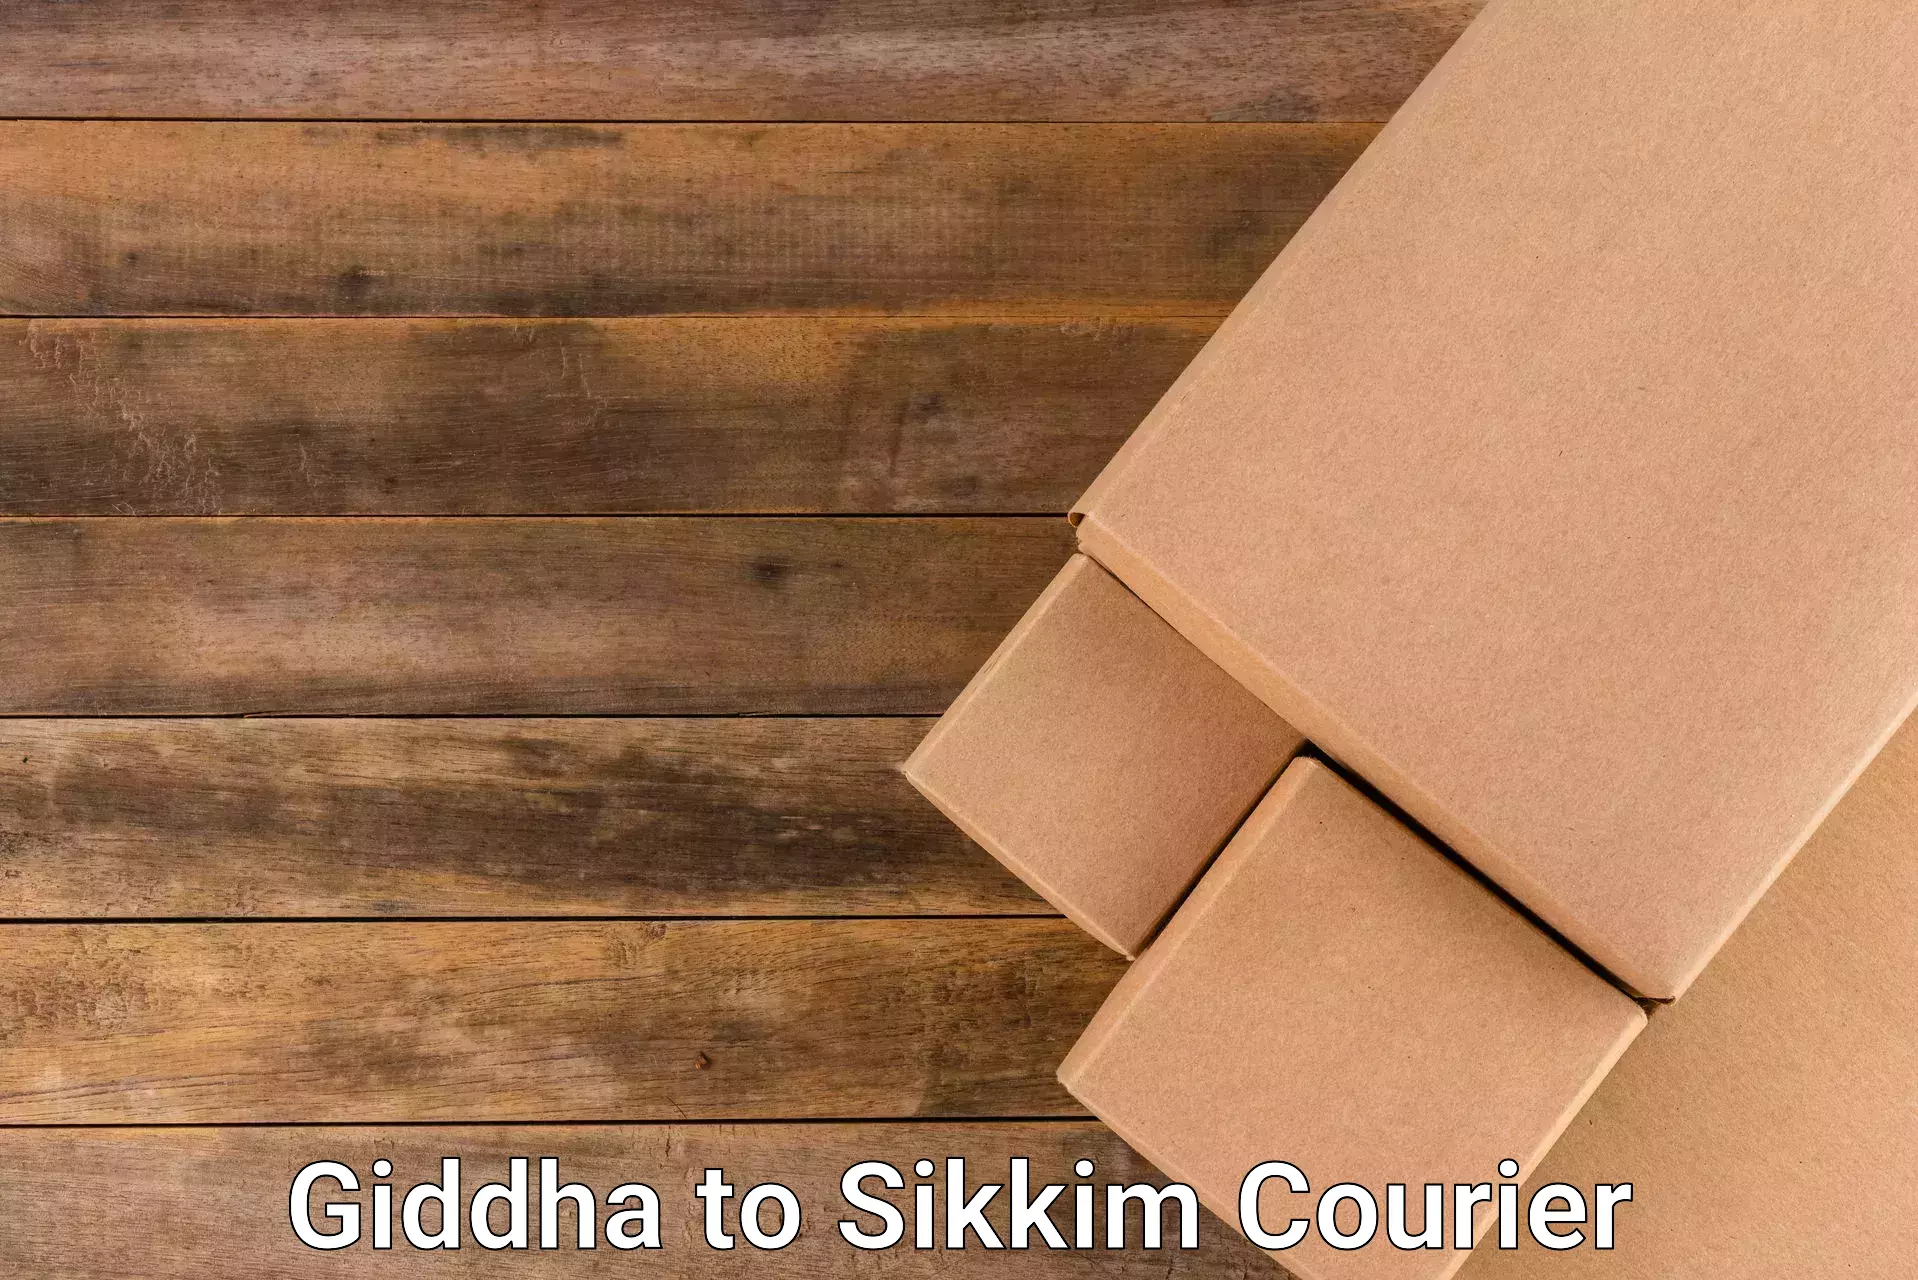 24/7 courier service in Giddha to Sikkim